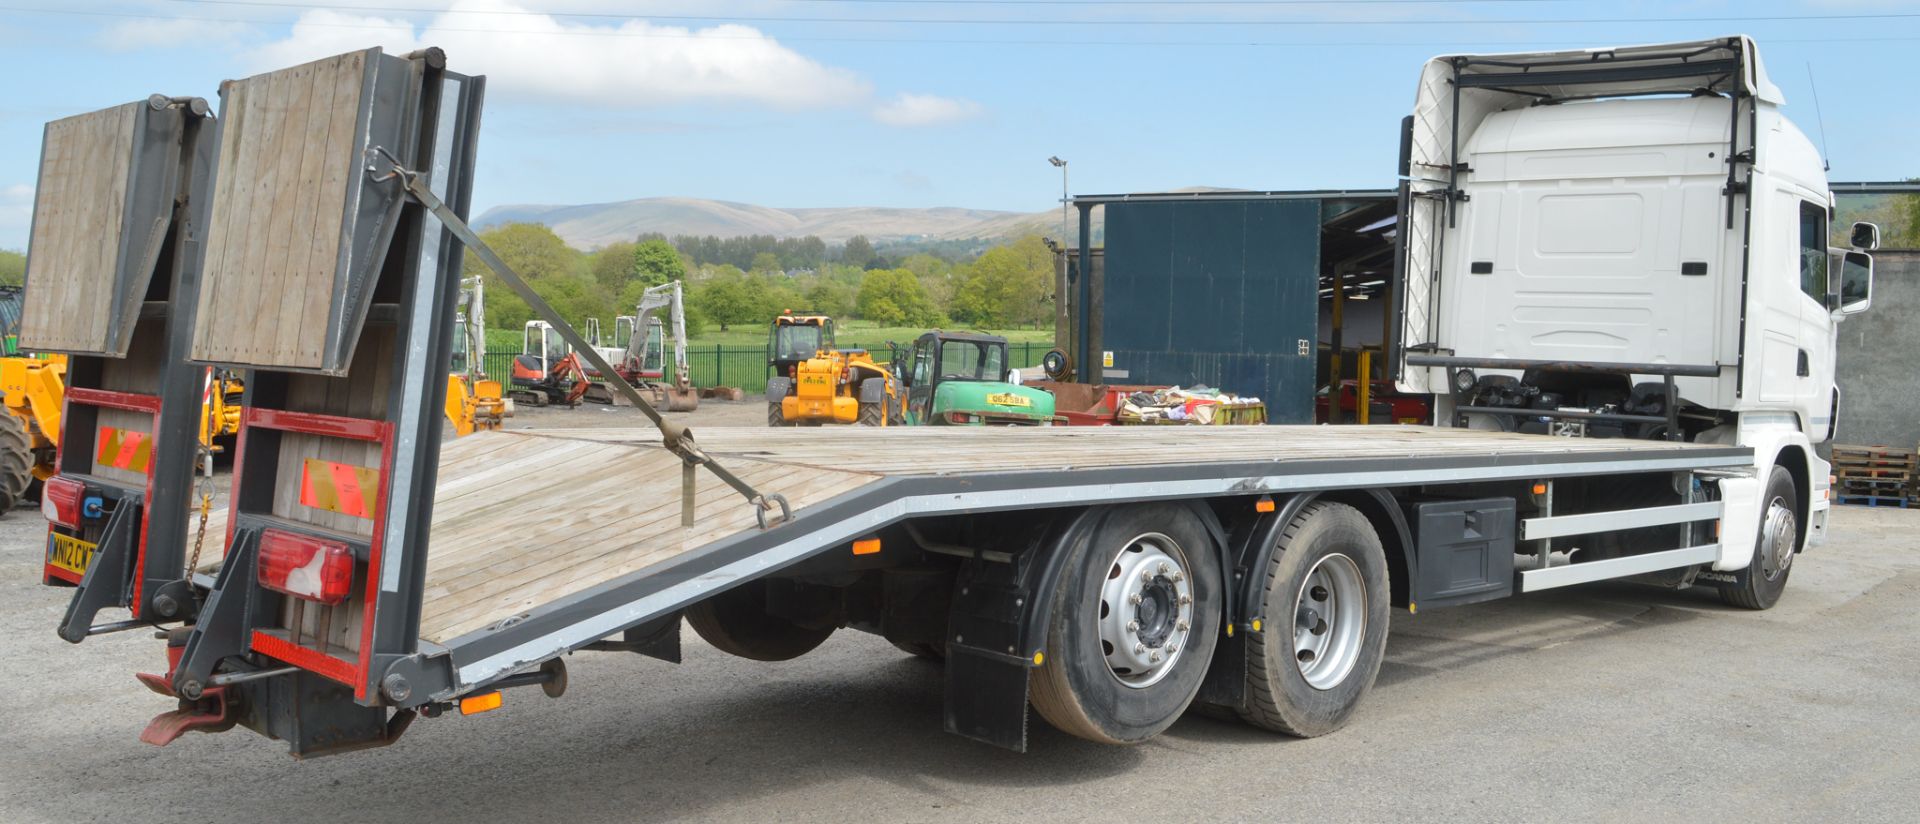 Scania R420 High Line Euro 5 6x2 30 foot beaver tail plant lorry  Registration number: WN12 CWZ - Image 3 of 11